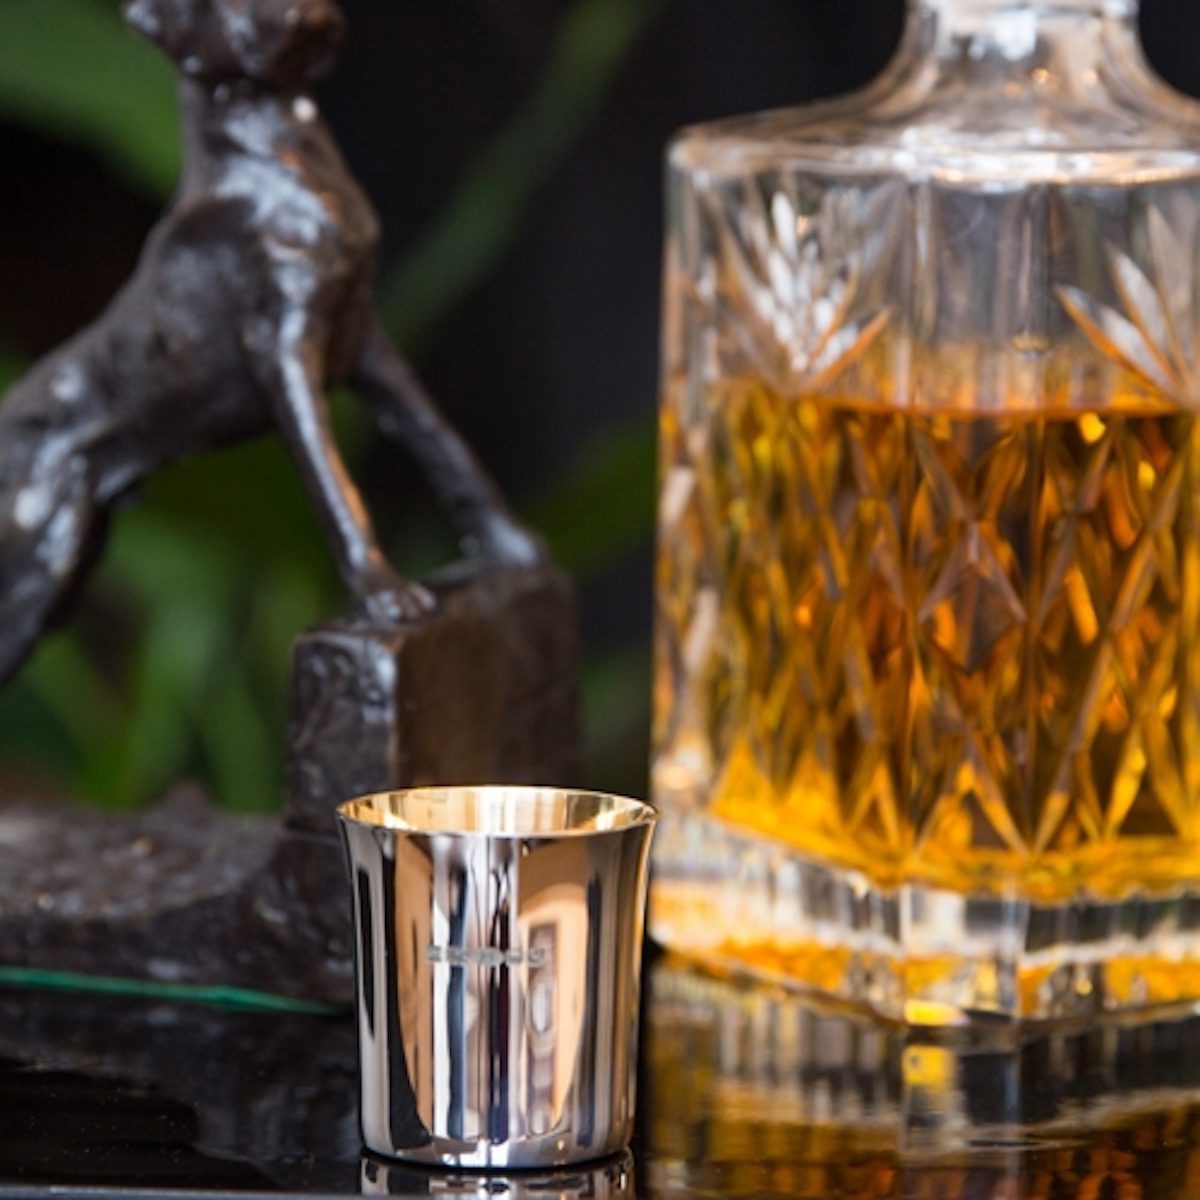 Large glass bottle of whiskey and a small sterling silver whiskey cup